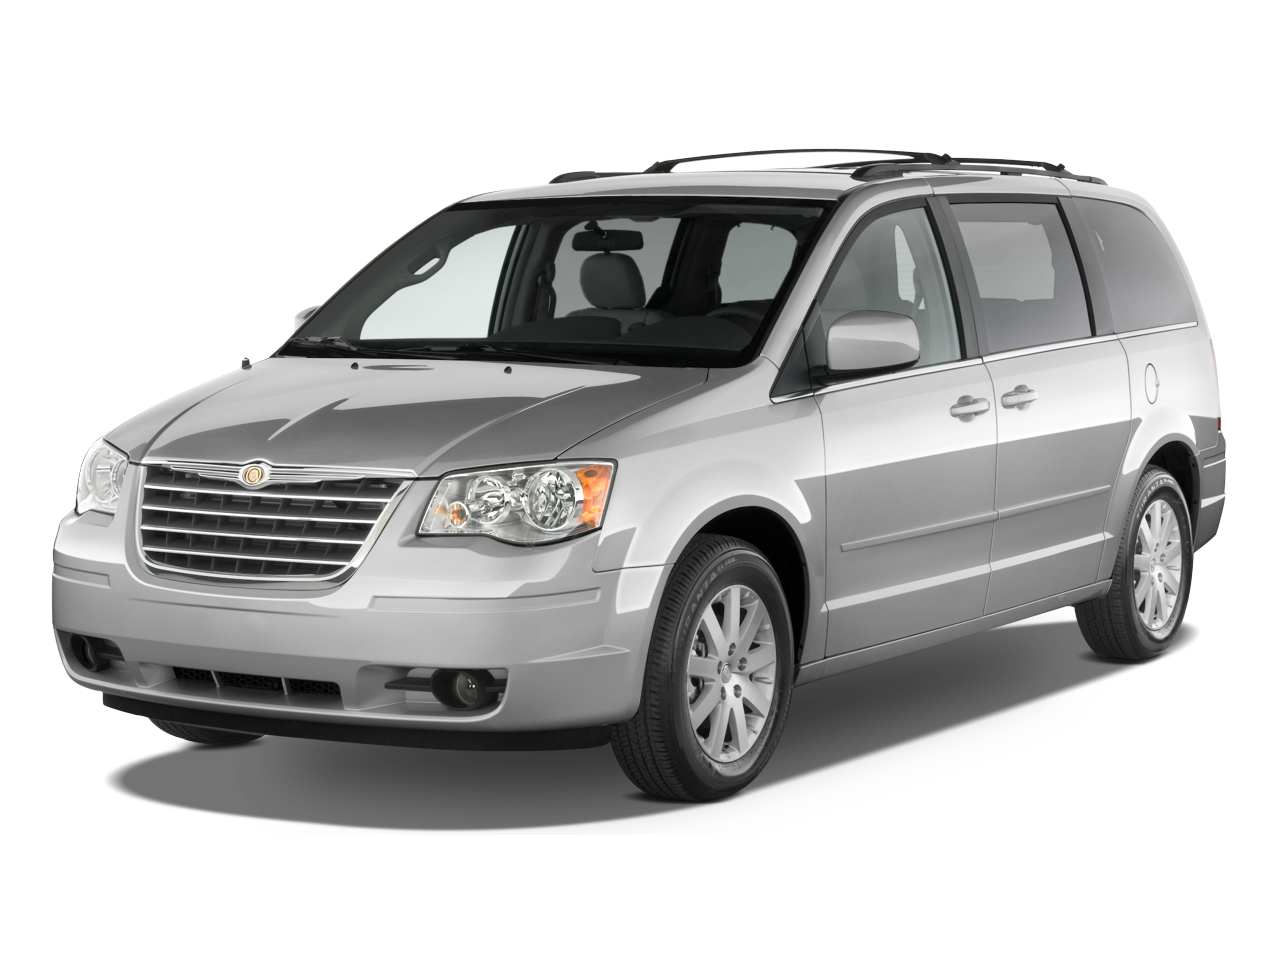 2010 Chrysler Town & Country Prices, Reviews, and Photos - MotorTrend